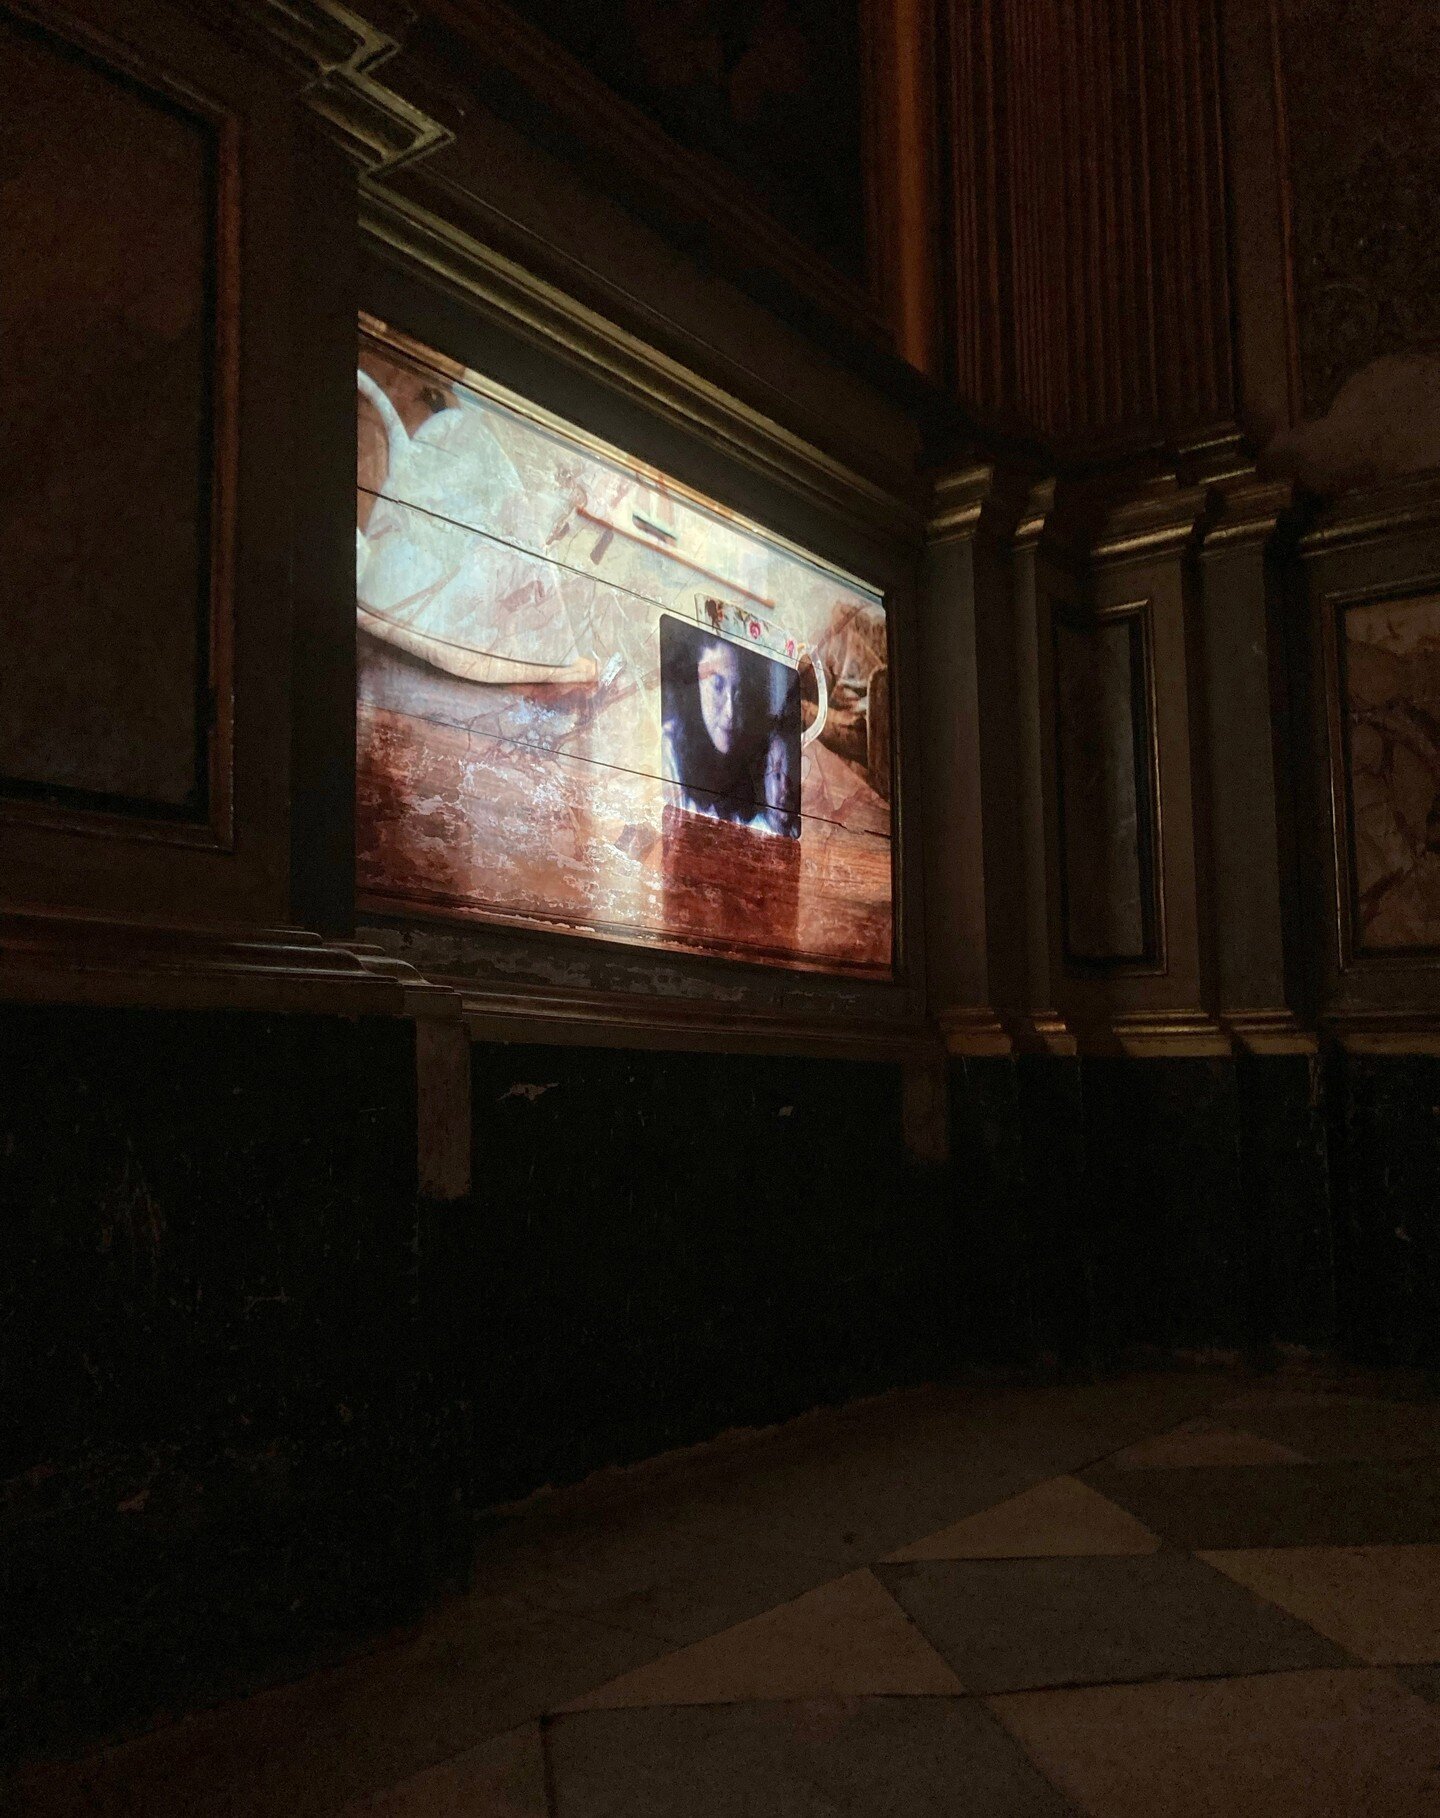 This past week my video piece '1976: Search for Life' screened in two different contexts at @traversevideo in Toulouse: once in a screening in an auditorium and the other occasion as an installation in a chapel. This exhibition is actually open until